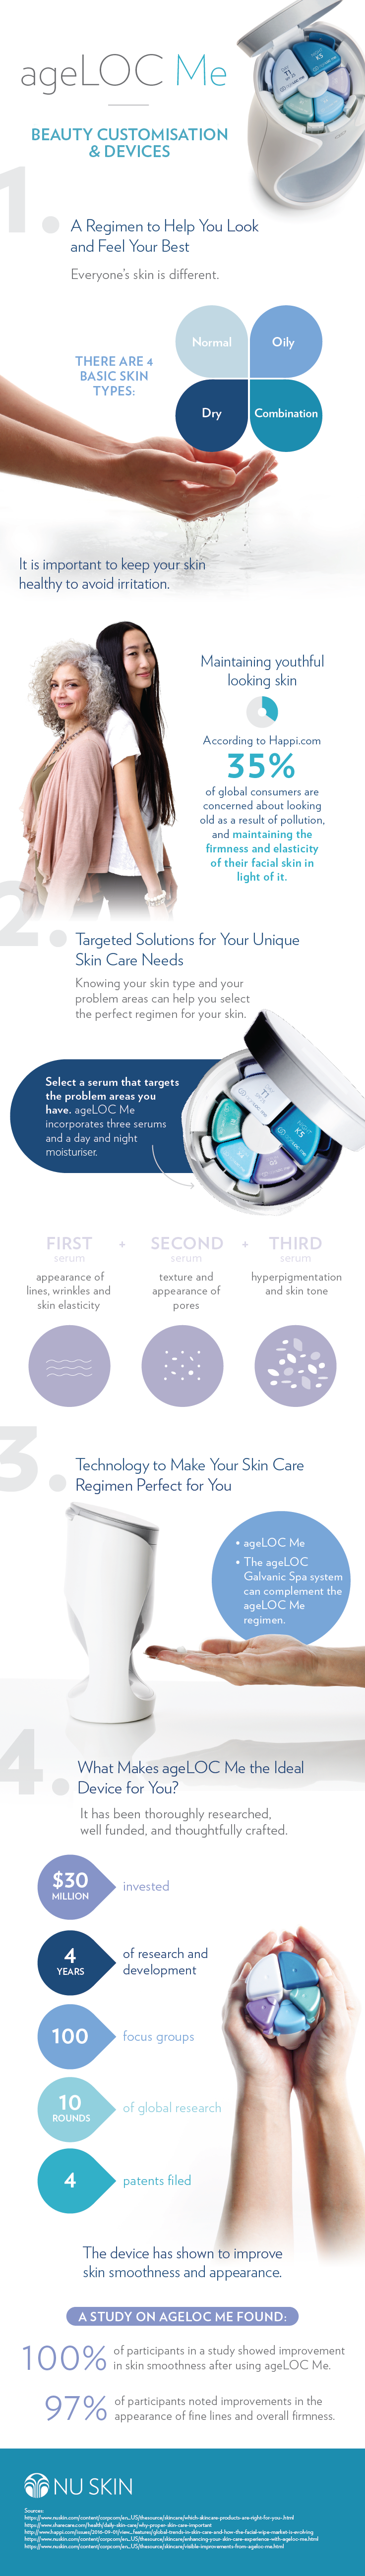 Nu Skin infographic, 4 reasons to use ageLOC Me